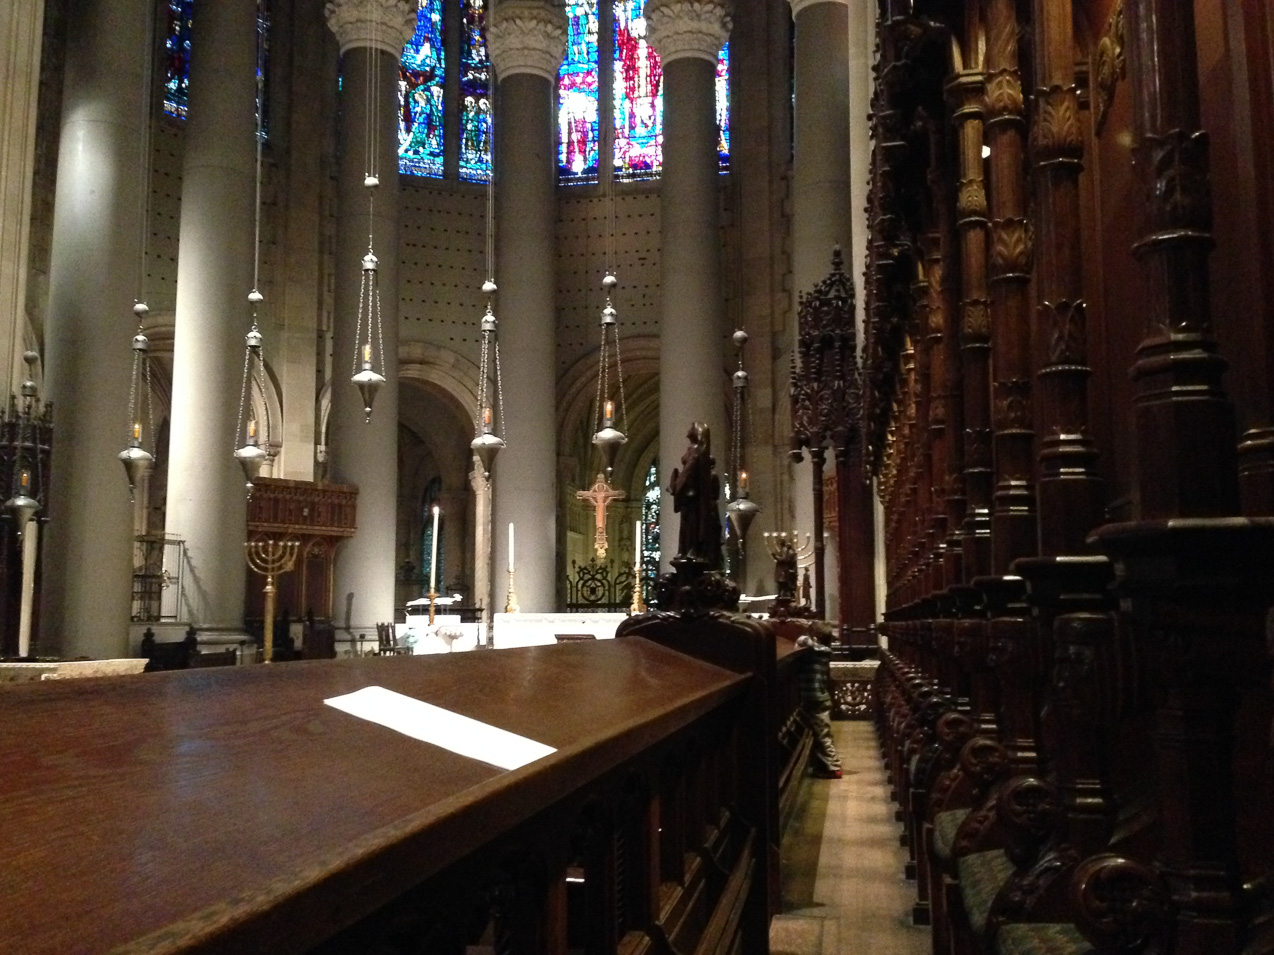  October 12, 2014 - Cathedral of St. John the Divine